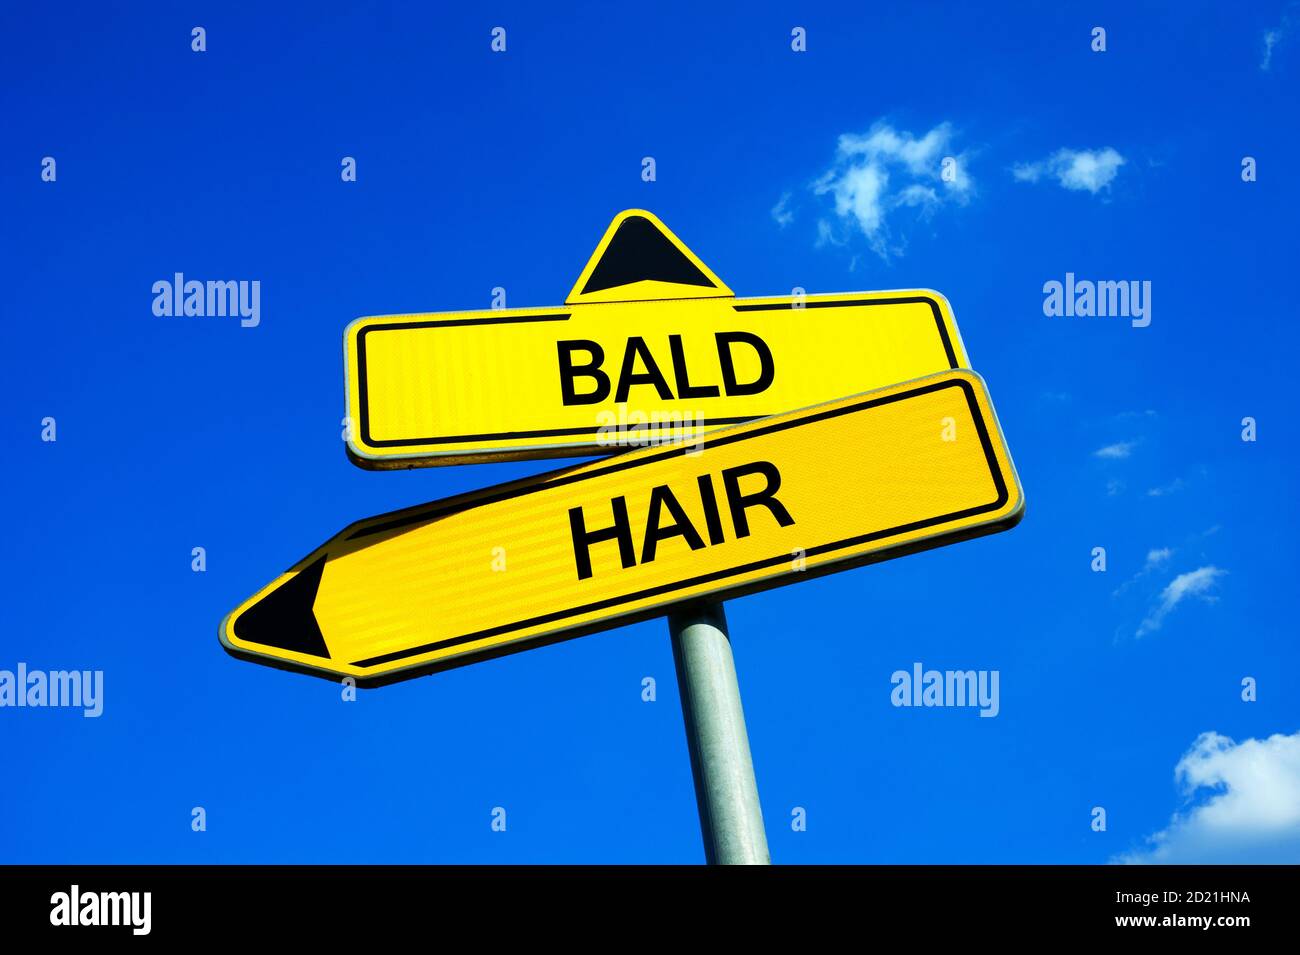 Bald or Hair - Traffic sign with two options - be bald-headed or have hairy head. Question of prevention, treatment, surgery, transplantation and arti Stock Photo